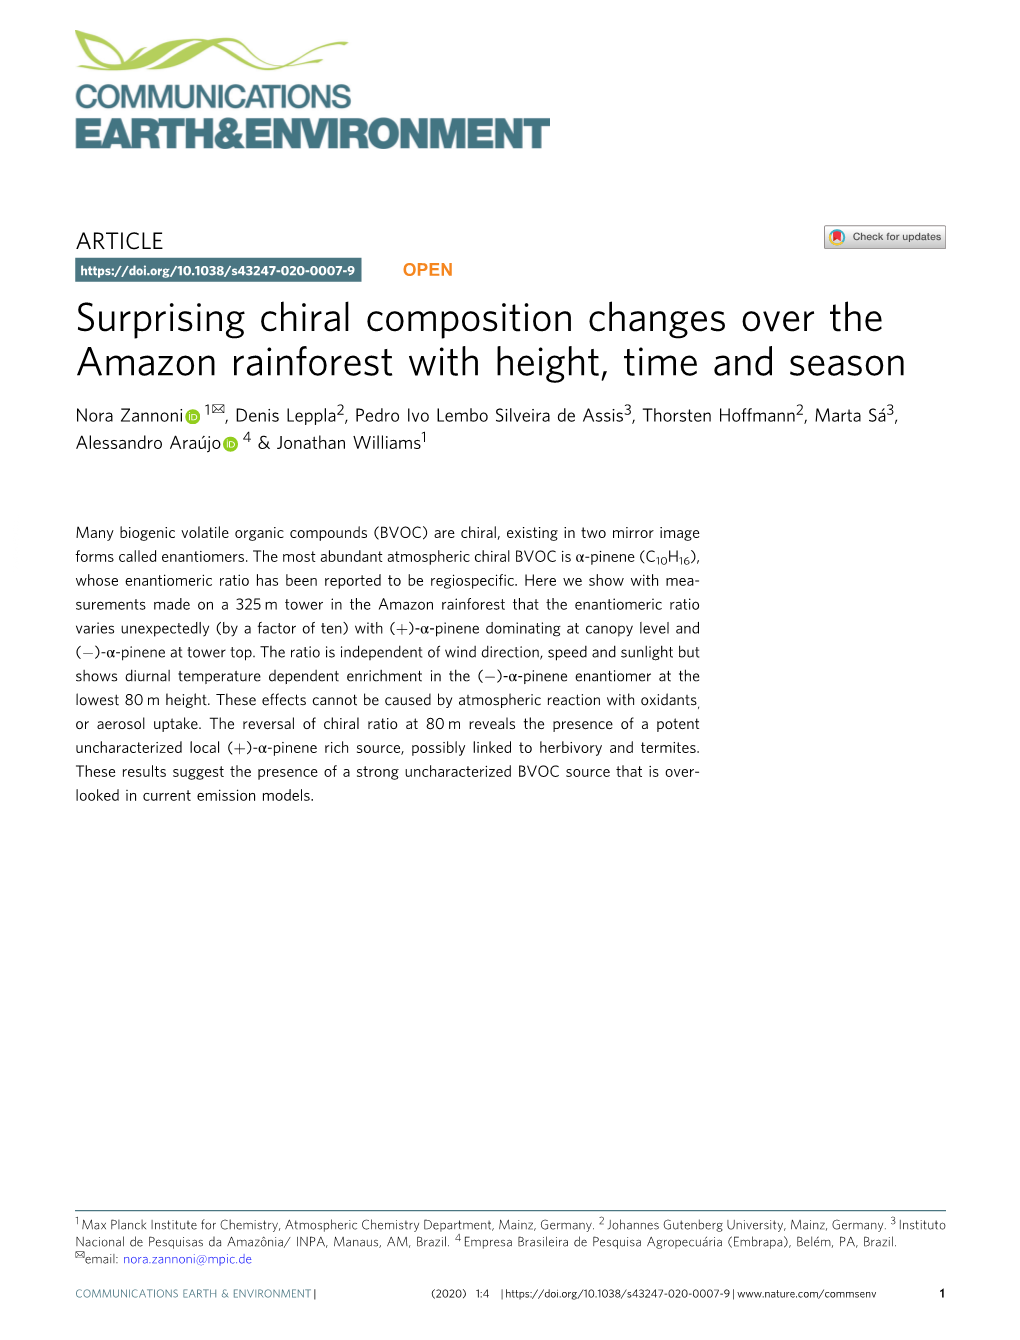 Surprising Chiral Composition Changes Over the Amazon Rainforest with Height, Time and Season